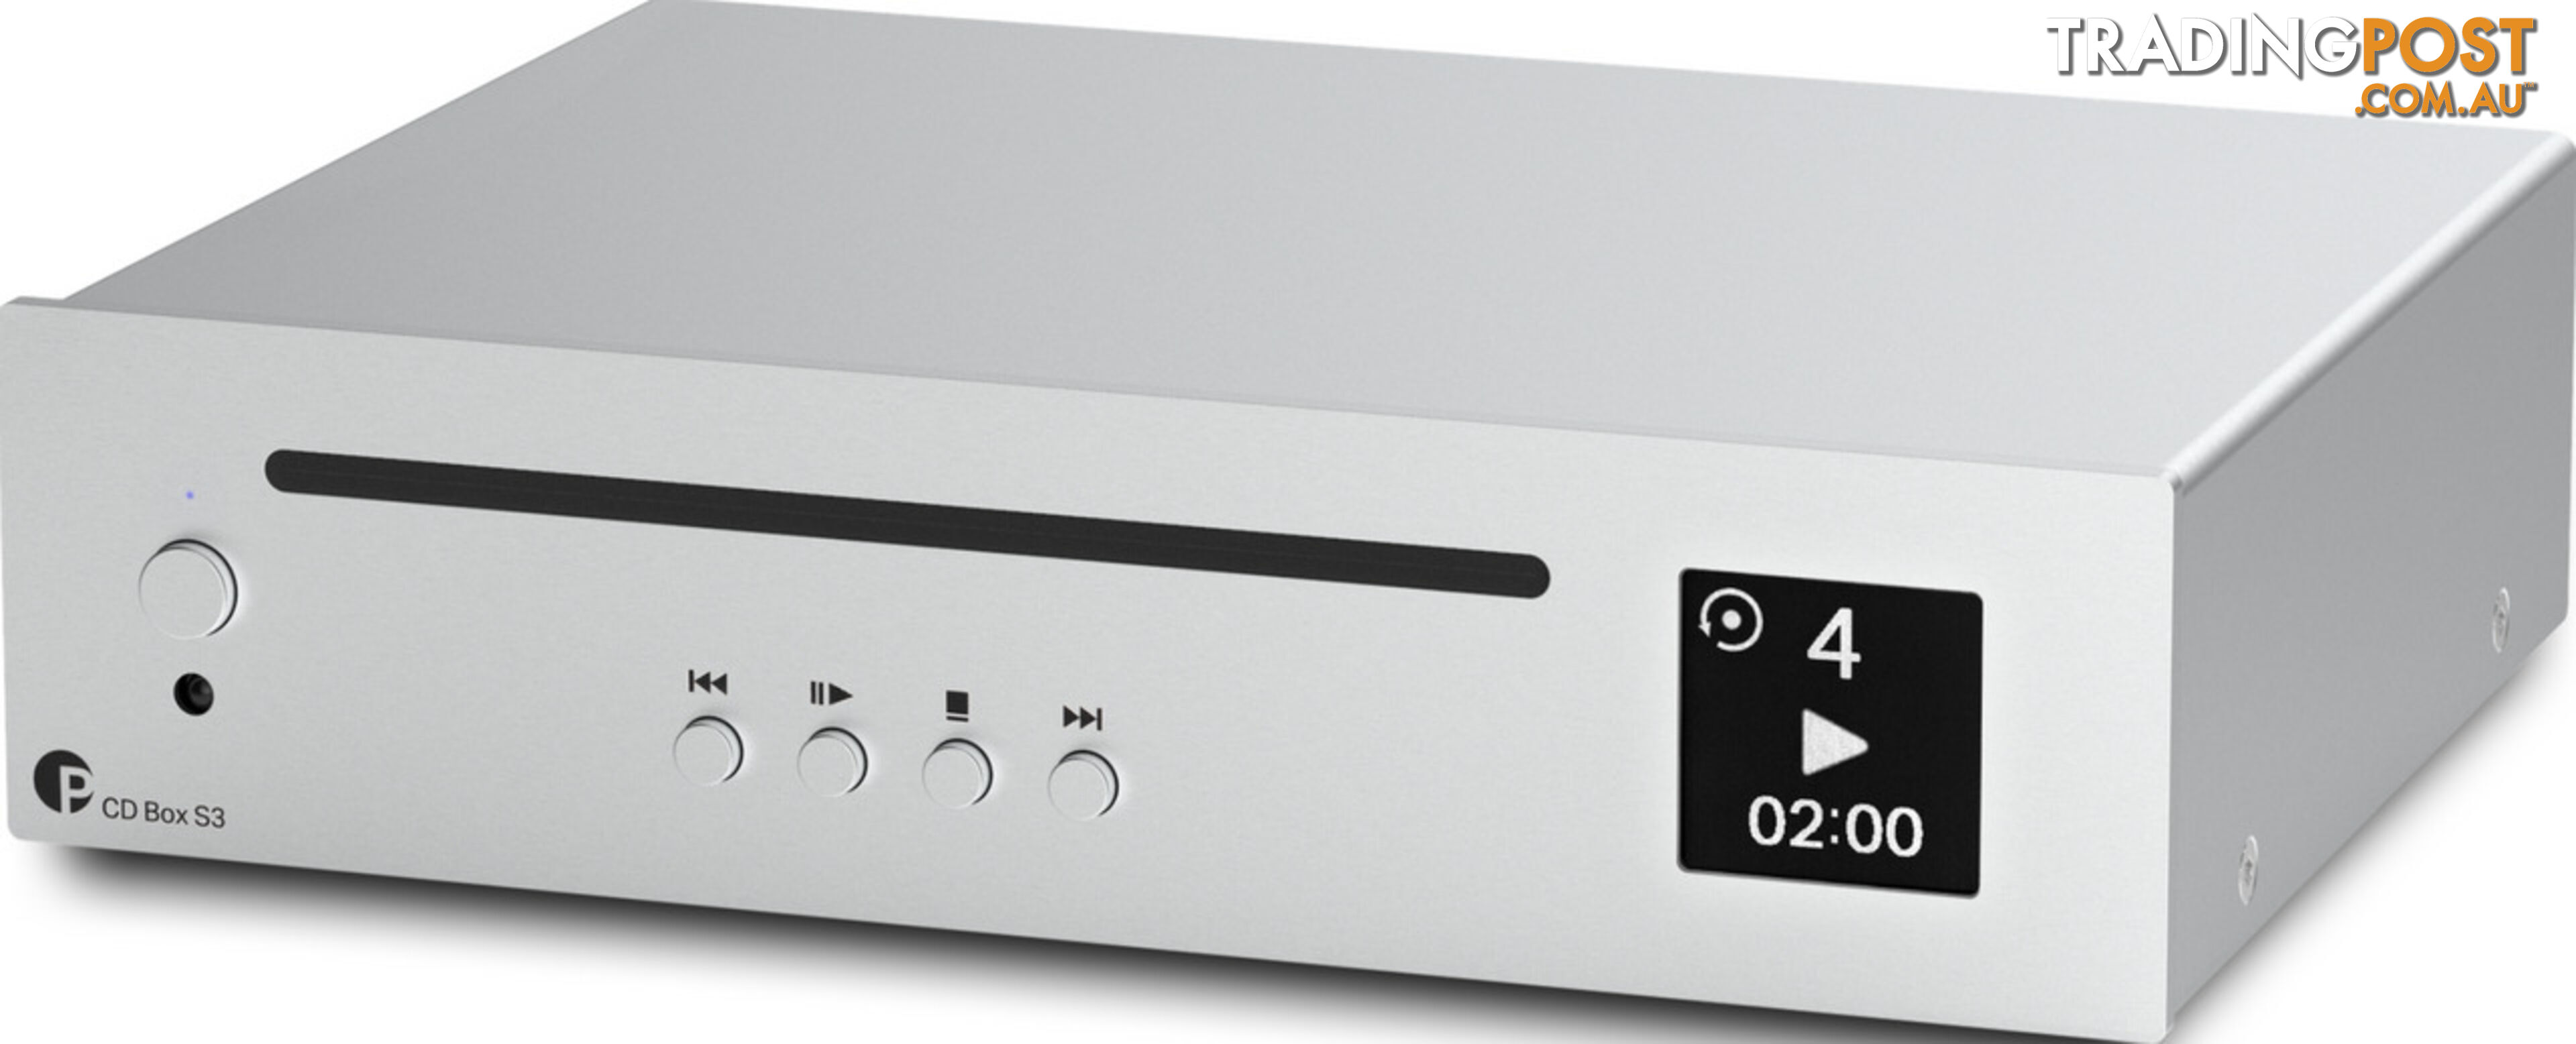 ProJect CD Box S3 Compact CD Player